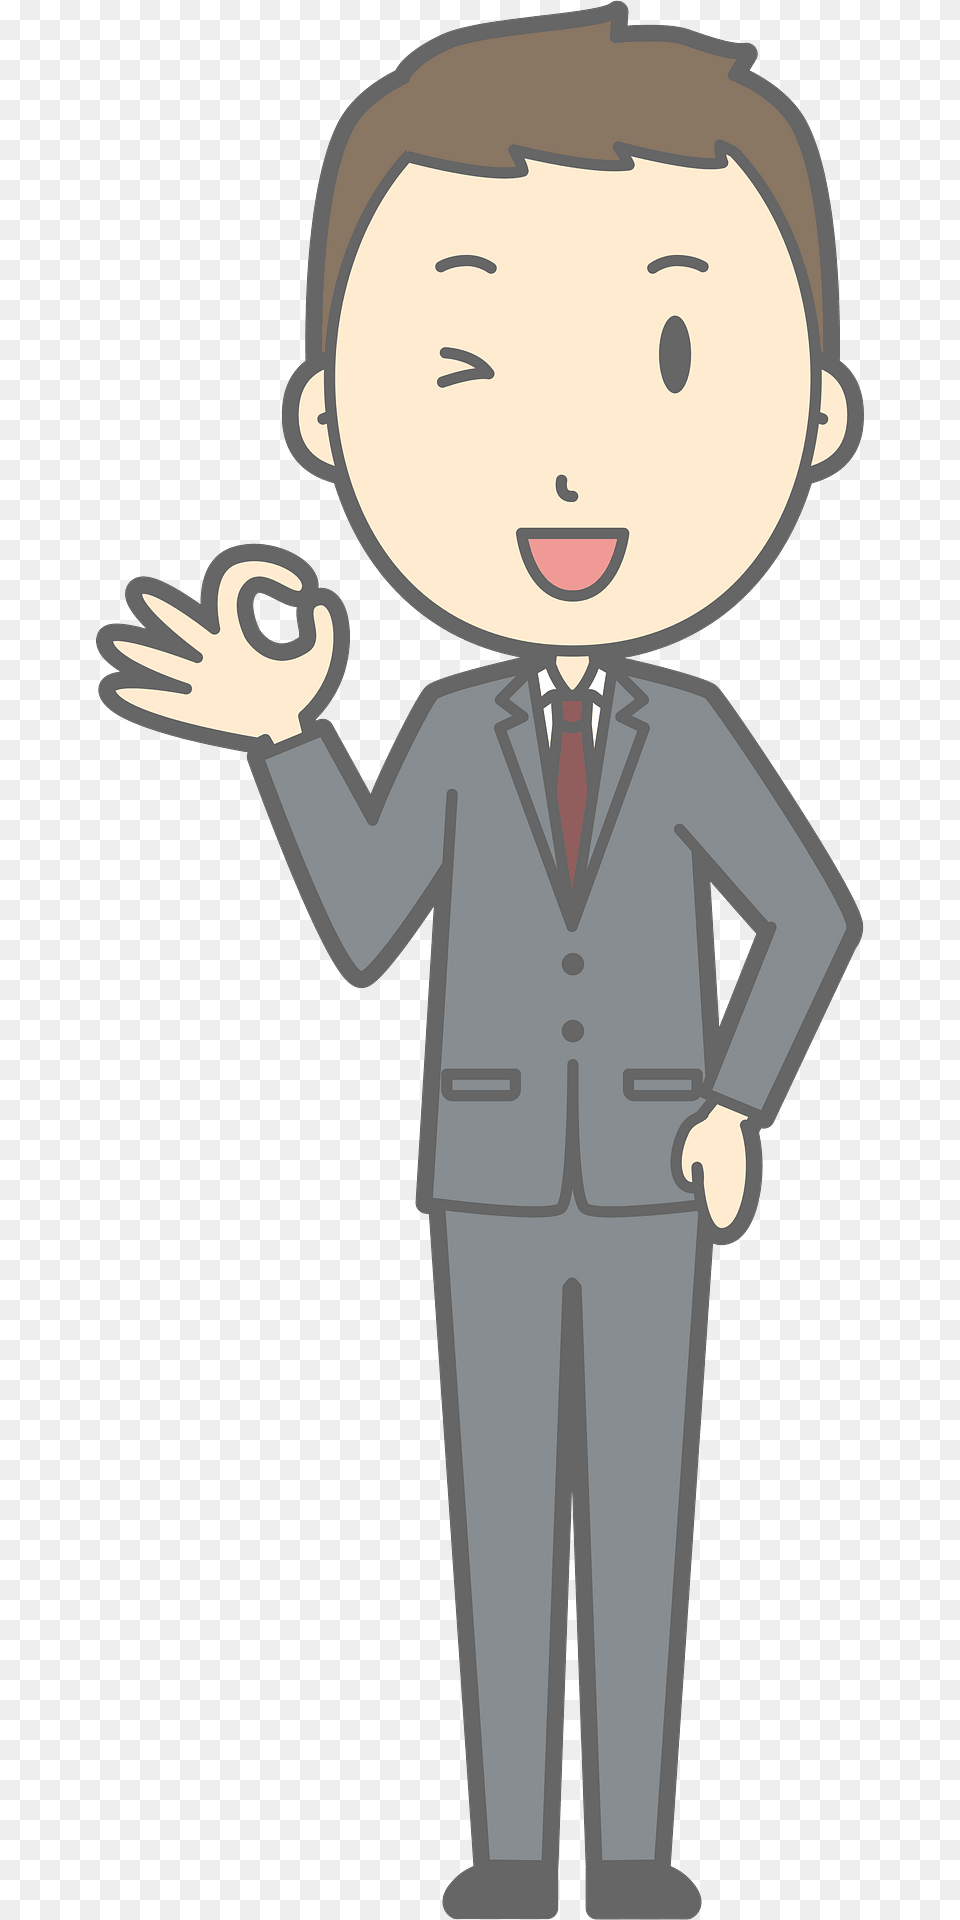 Nathan Man Is Giving Ok Sign Clipart, Clothing, Formal Wear, Suit, Baby Free Transparent Png